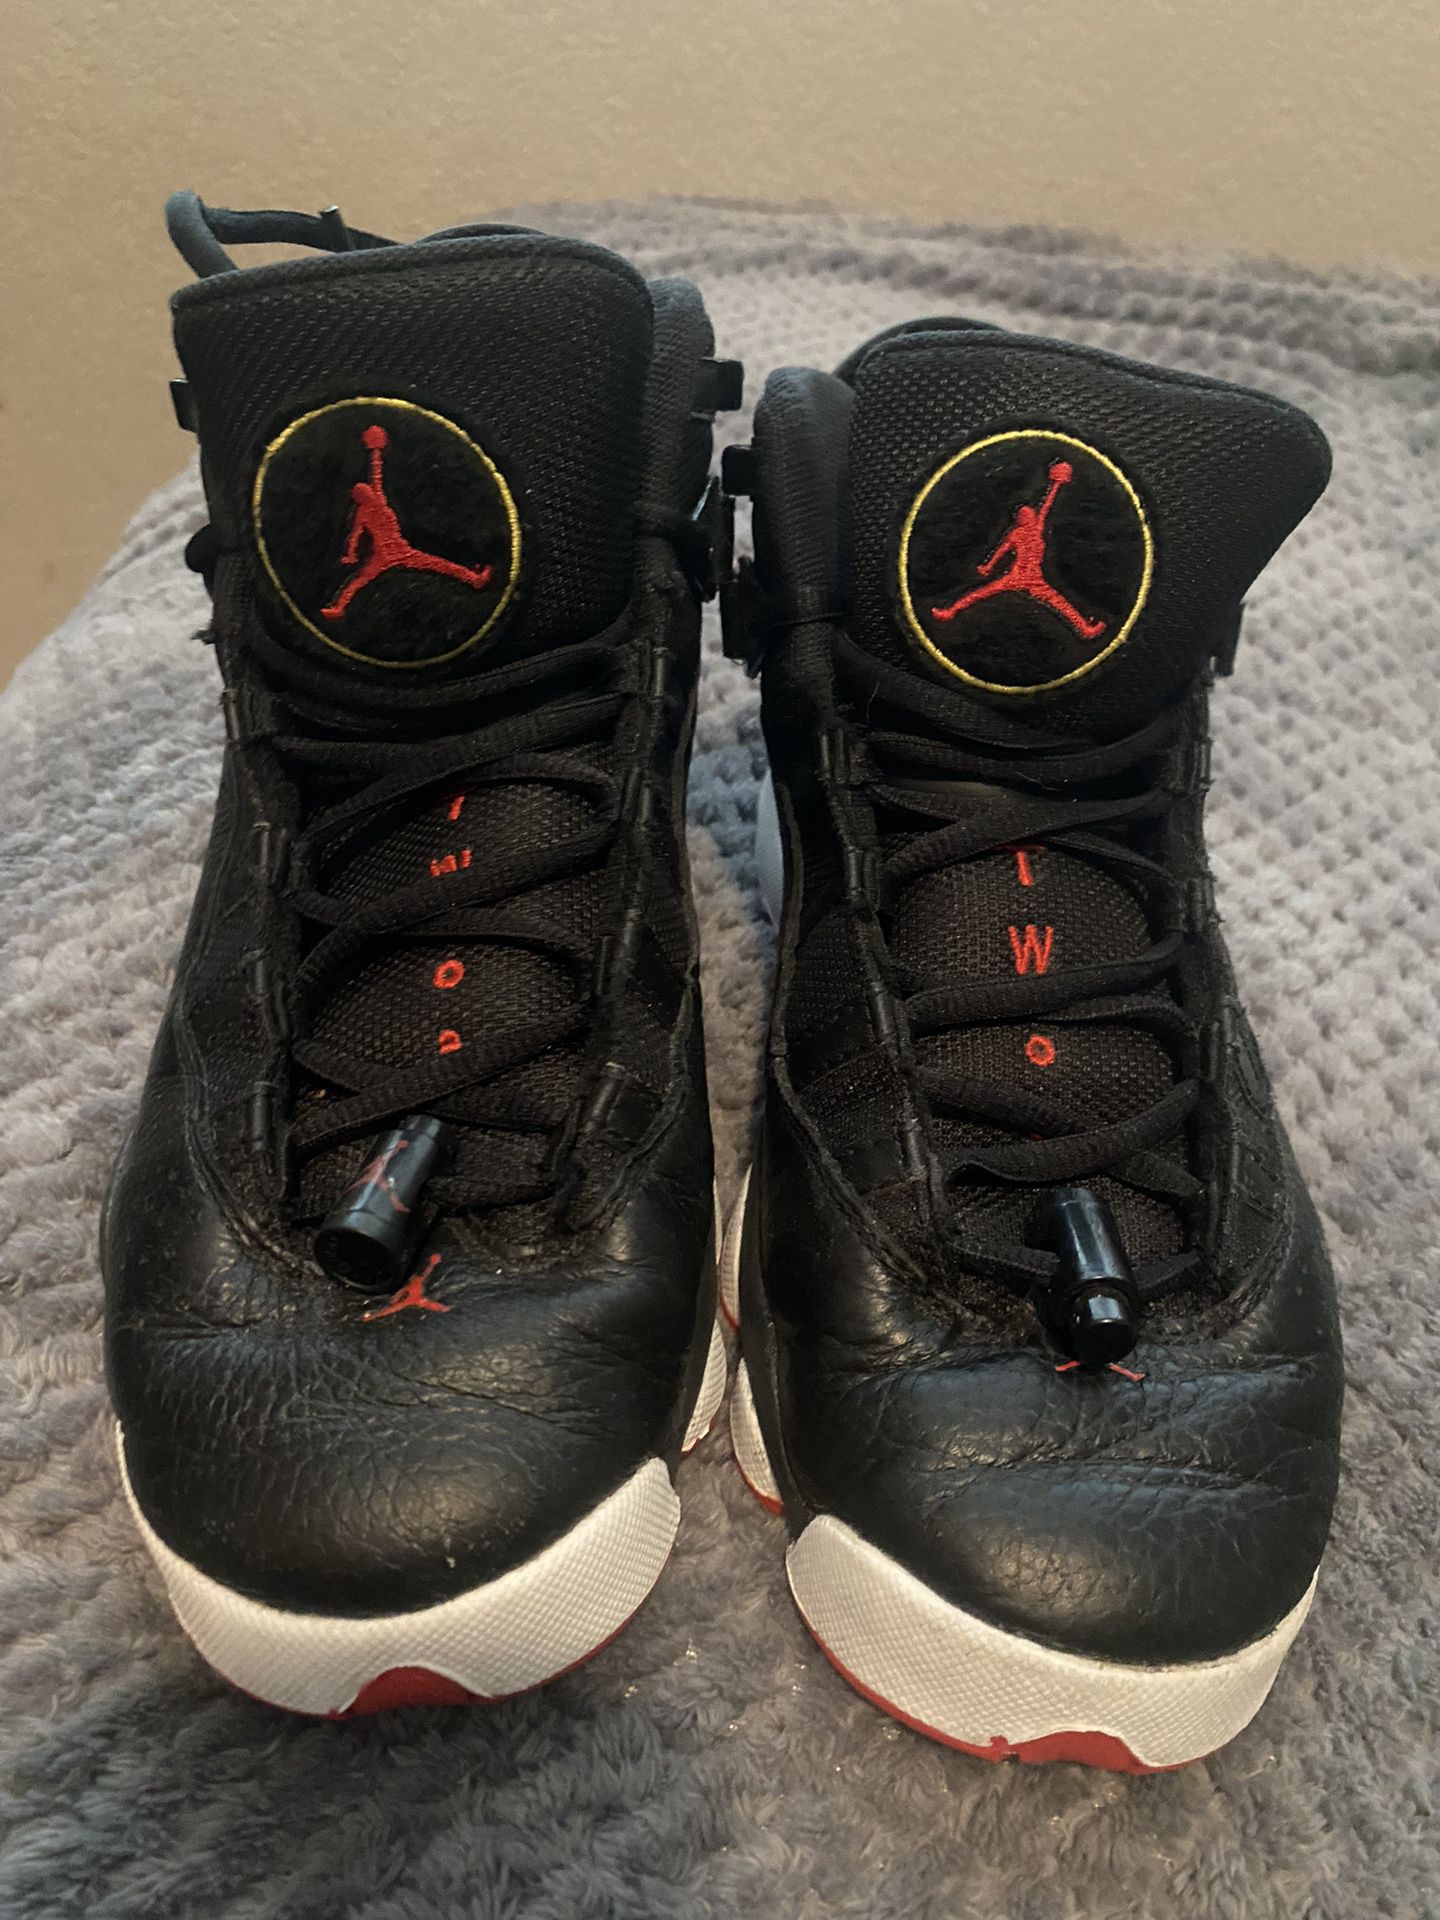 Jordan 6 Rings NOT FREE BUT WILL SELL FOR CHEAP